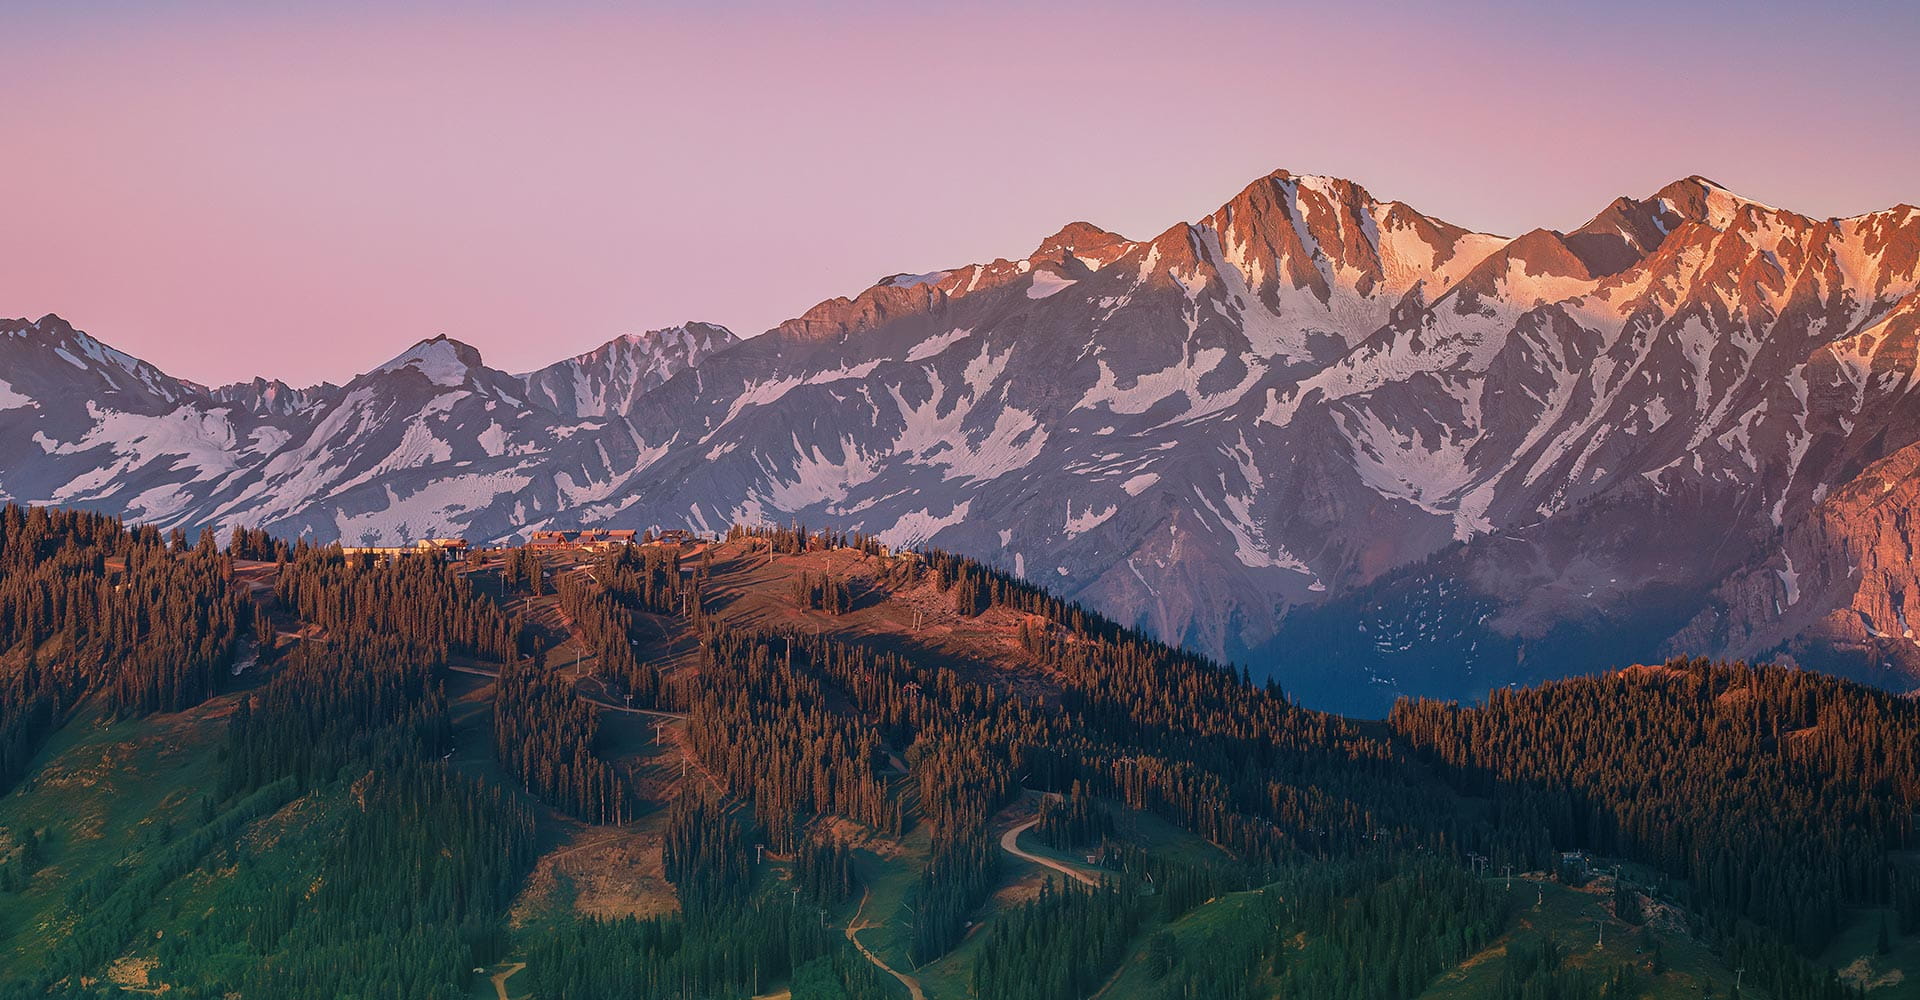 Aspen Mountain with the Elk Mountains at sunrise.